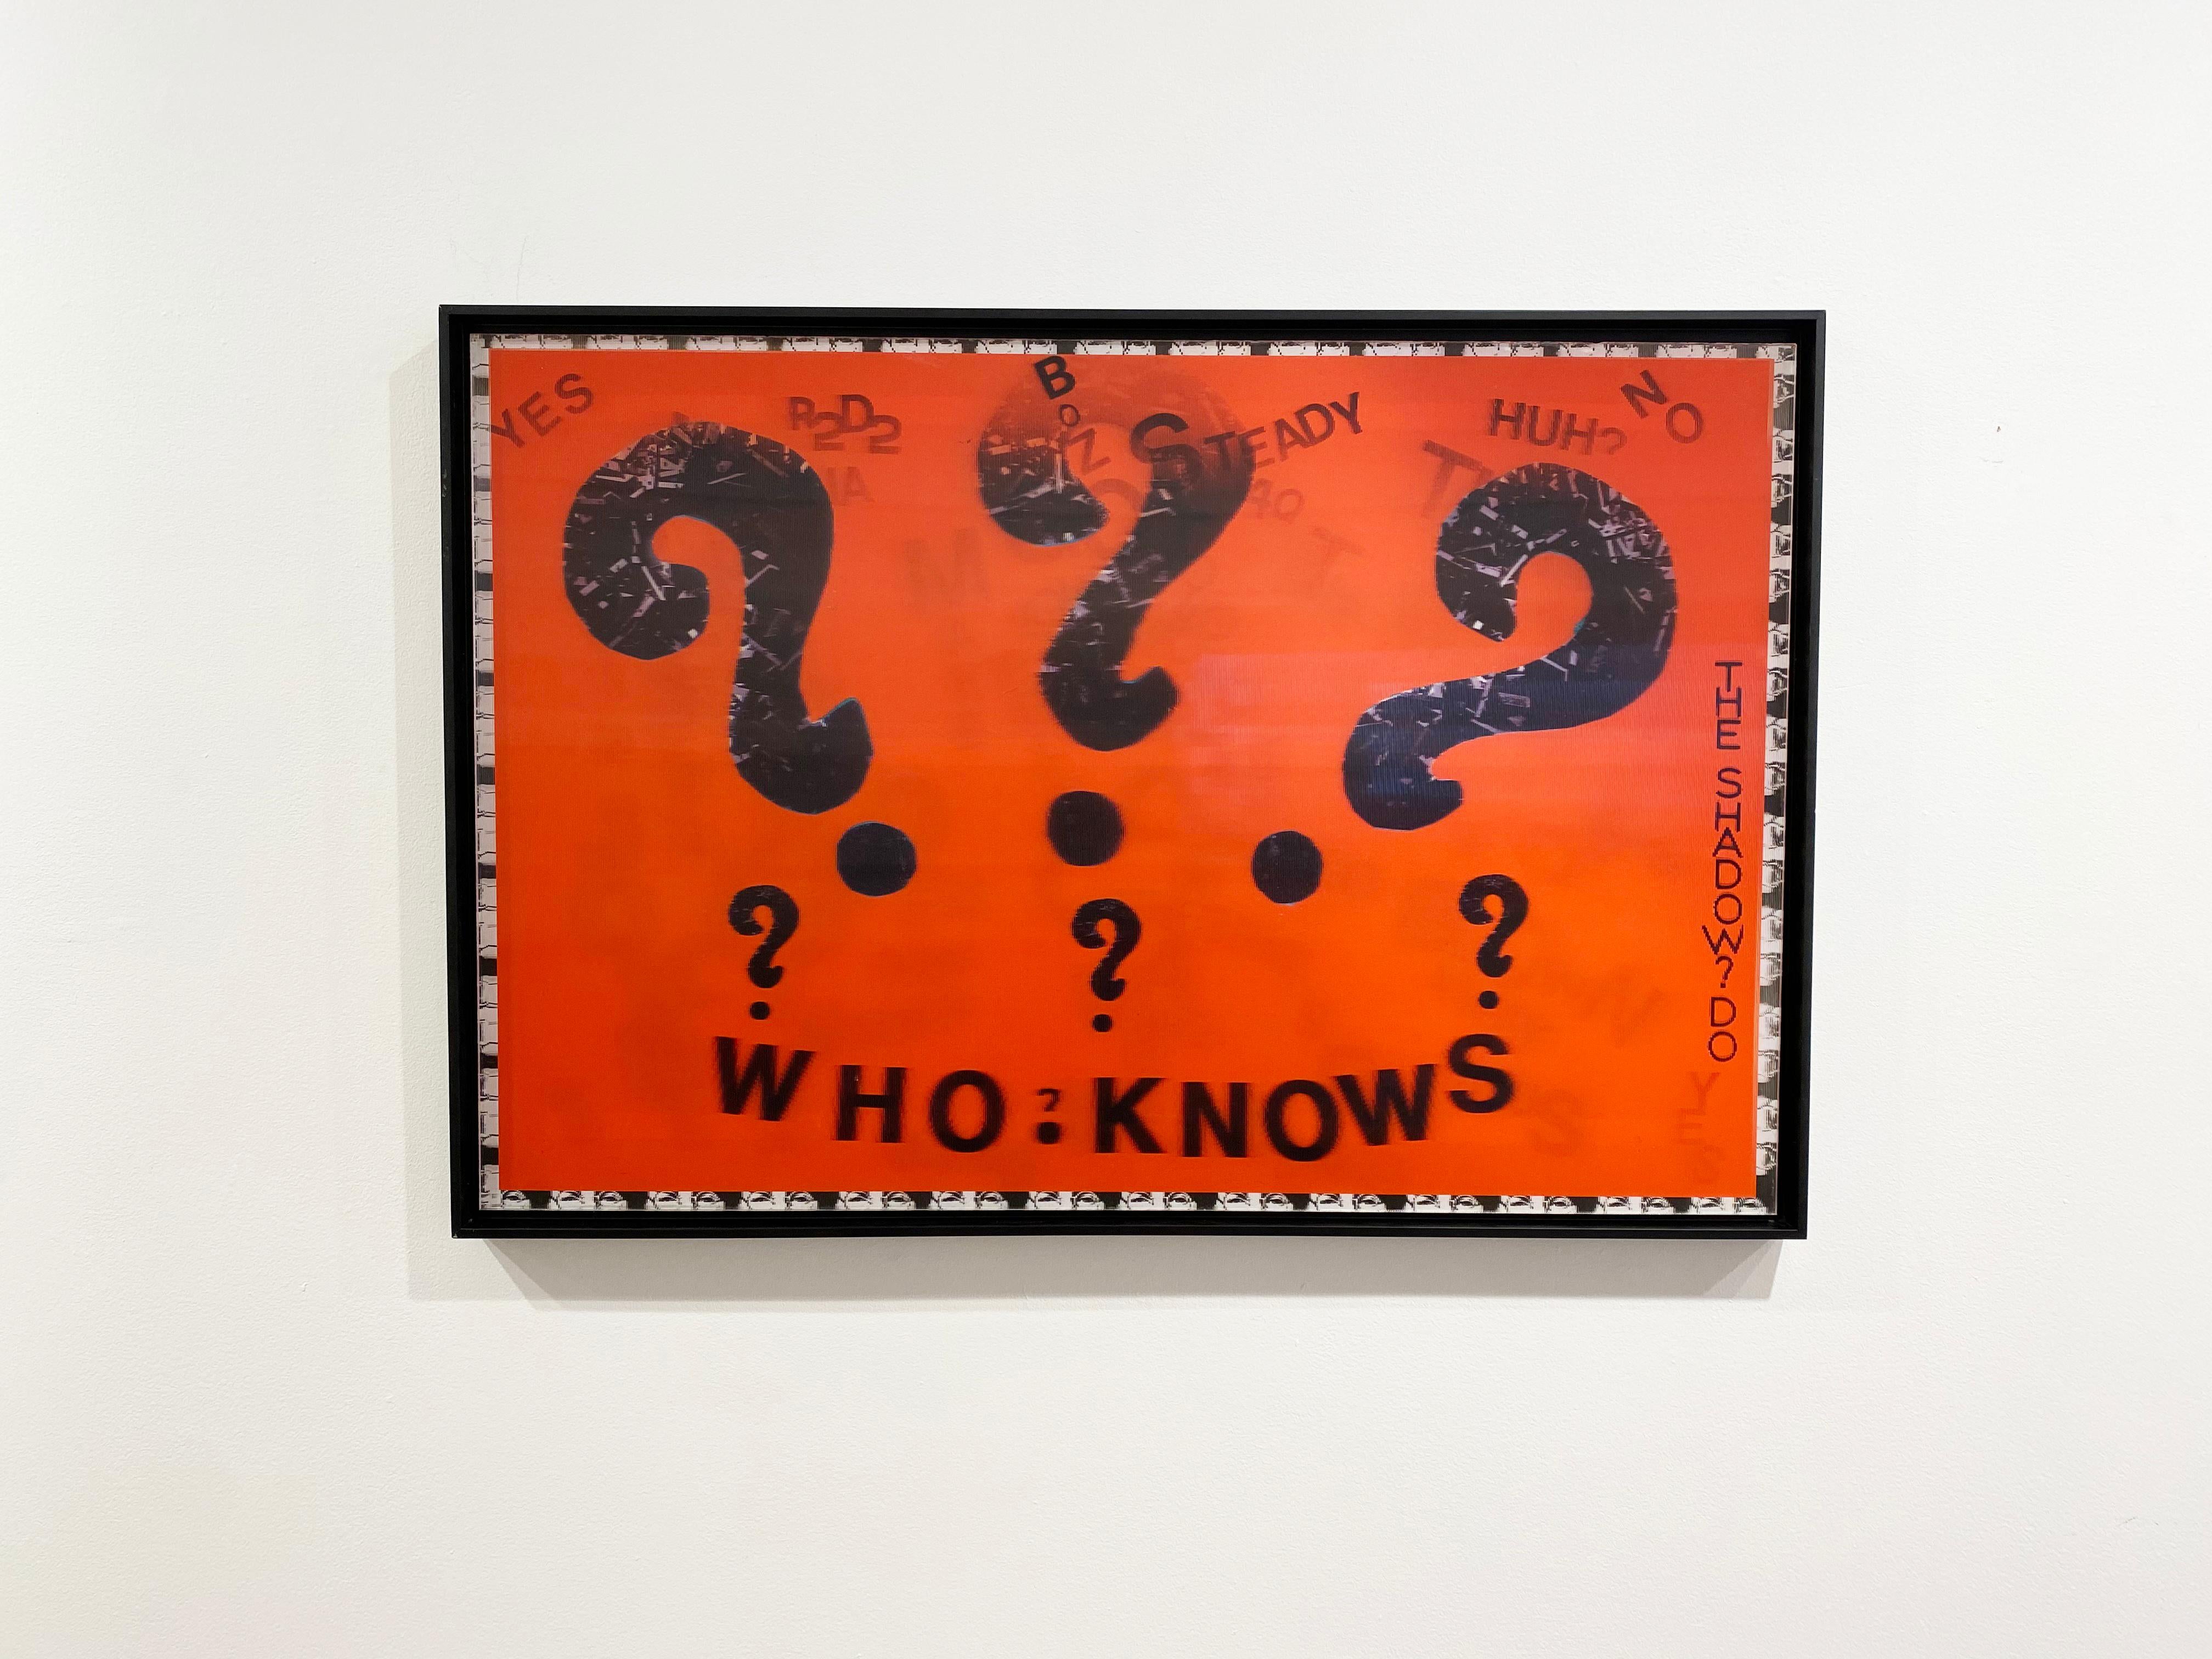 'Who Knows' by DJ Leon, 2013. The piece measures 36 x 24 inches. This Lenticular print incorporates disjointed words and phrases placed within an orange/red background while encouraging a free-flowing stream of consciousness. Different words and